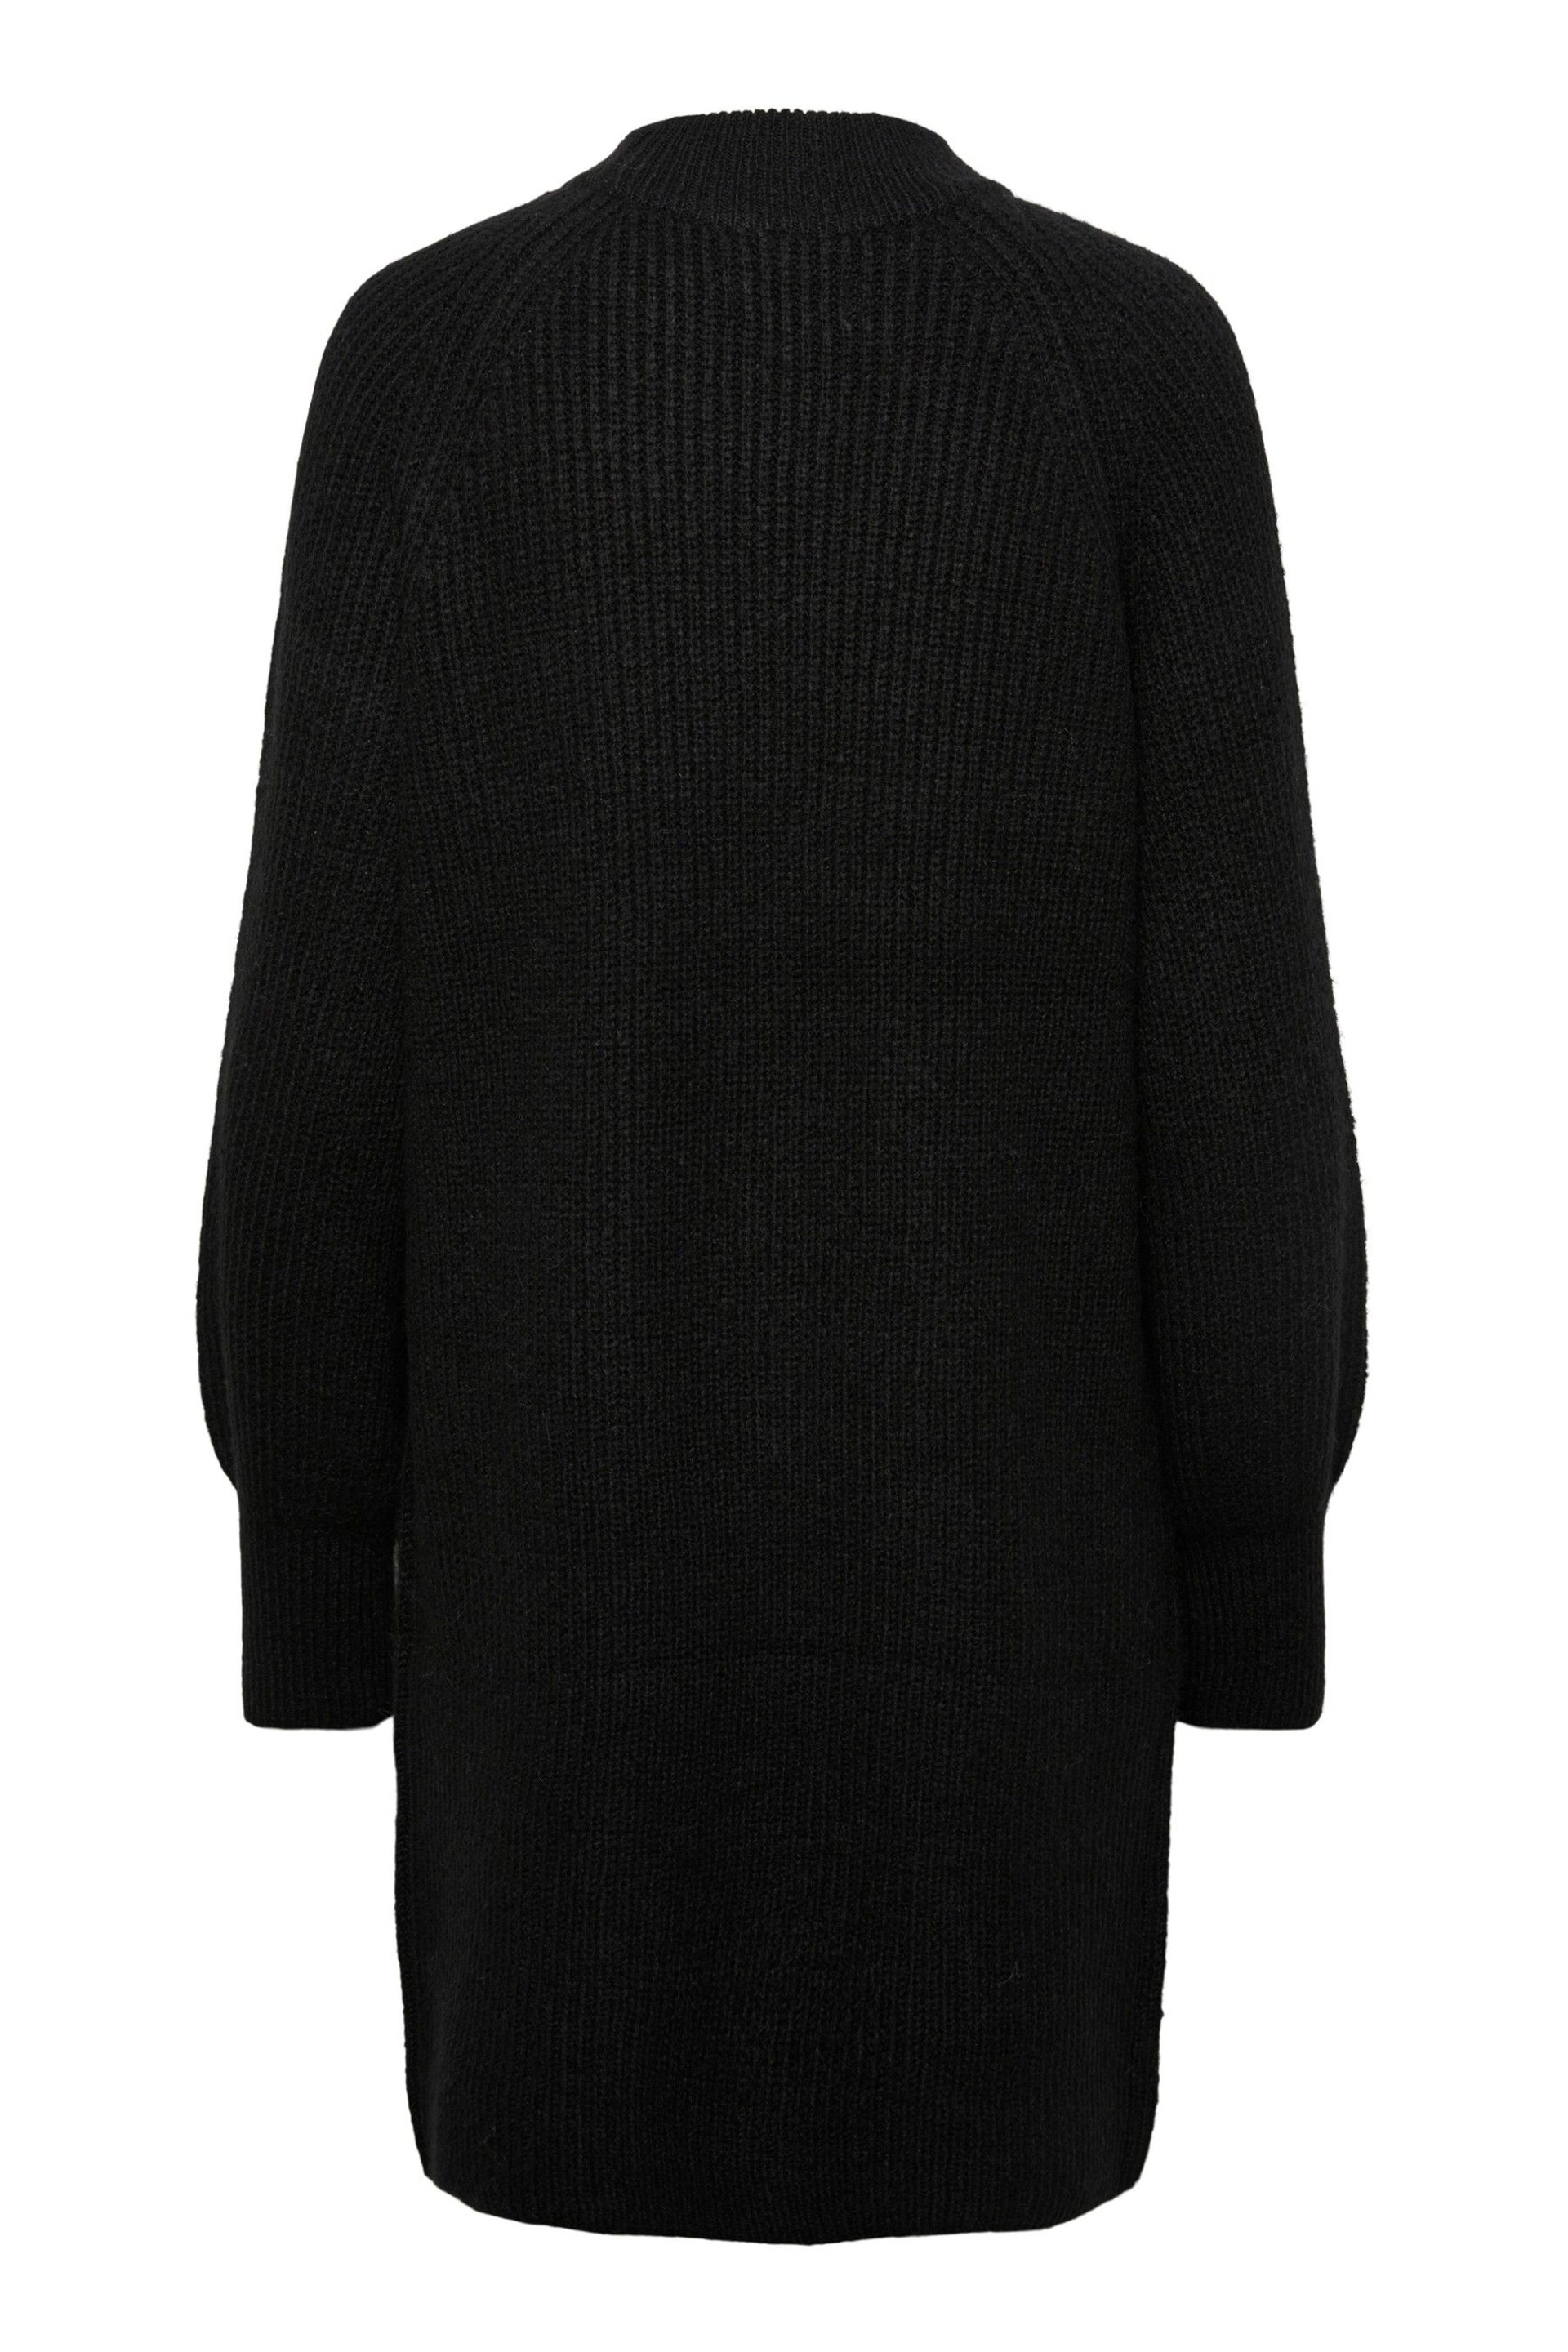 PIECES Black High Neck Knitted Balloon Sleeve Jumper Dress - Image 5 of 5